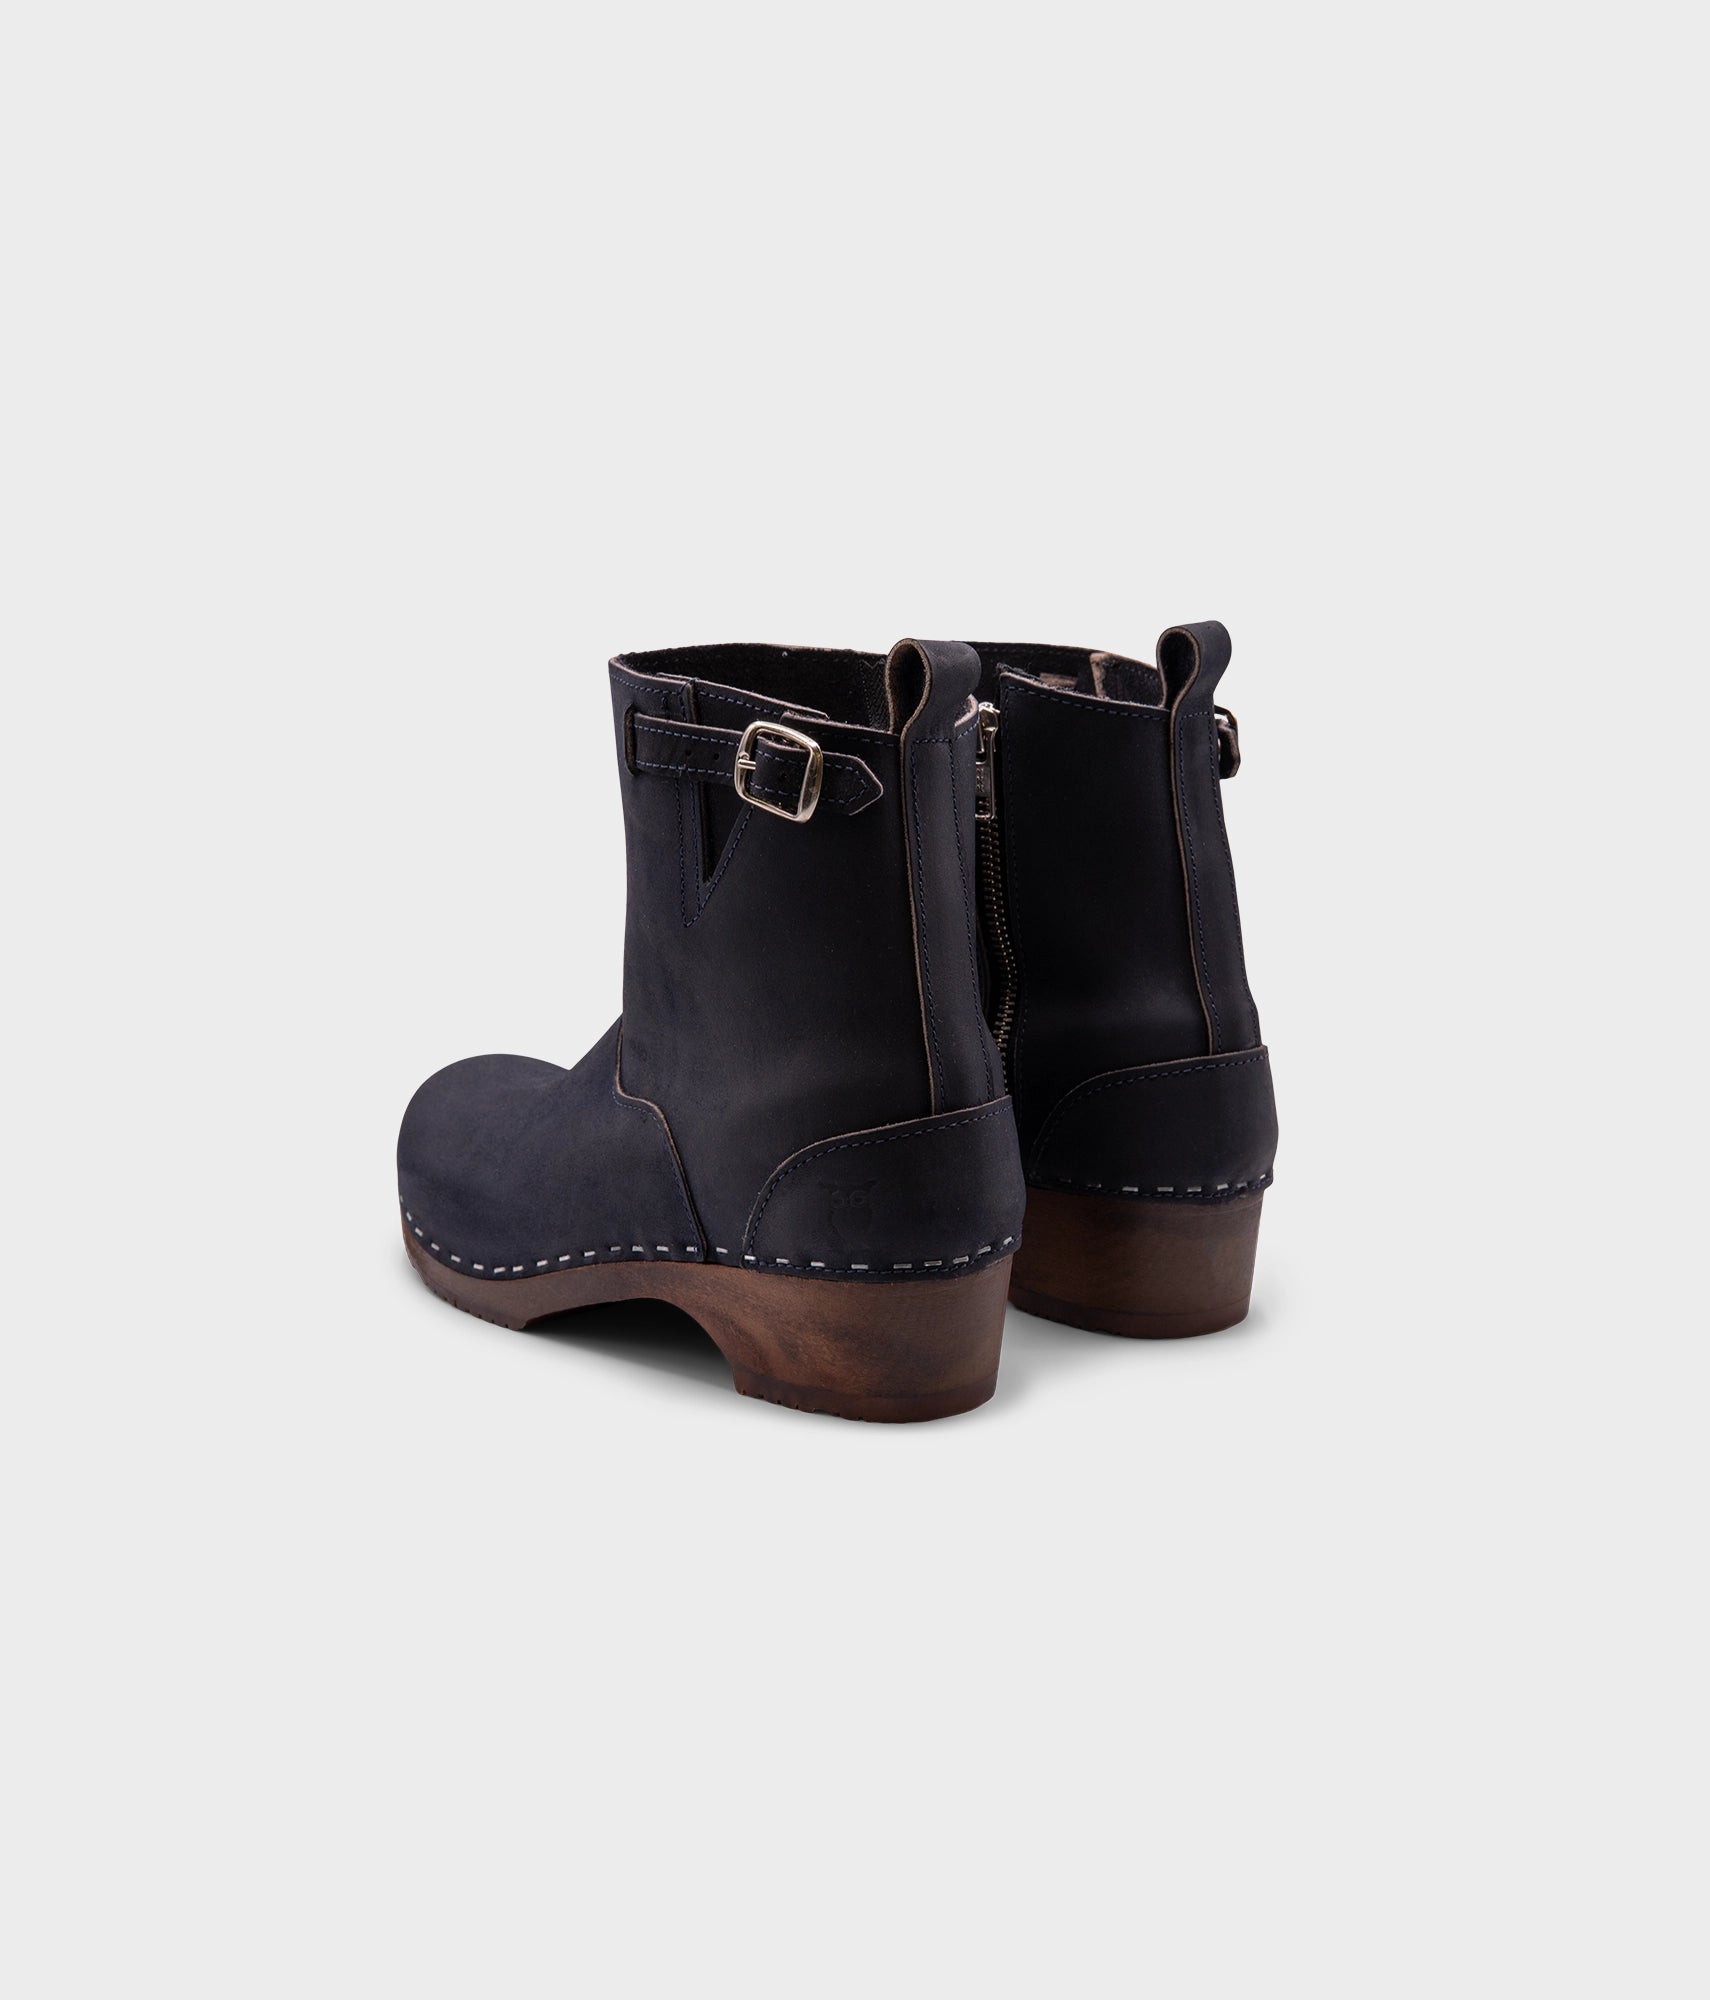 low heeled clog boots in navy blue nubuck leather with a mid-shaft and silver buckle, stapled on a dark wooden base